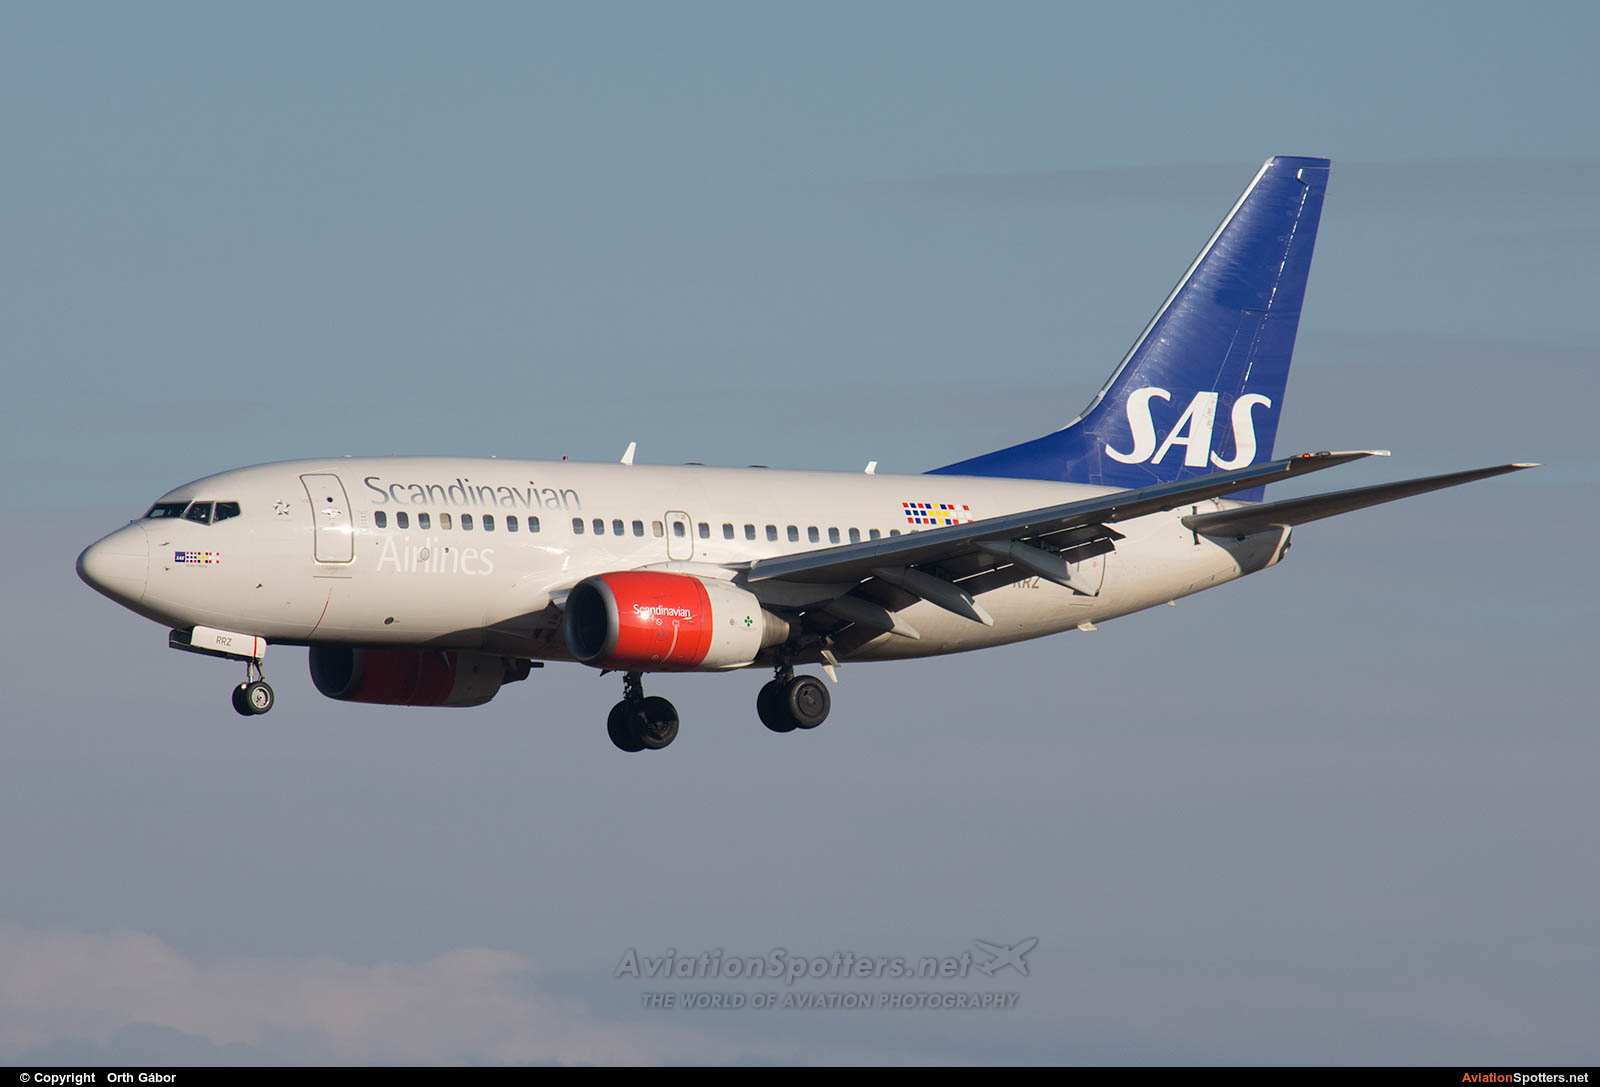 SAS - Scandinavian Airlines  -  737-600  (LN-RRZ) By Orth Gábor (Roodkop)